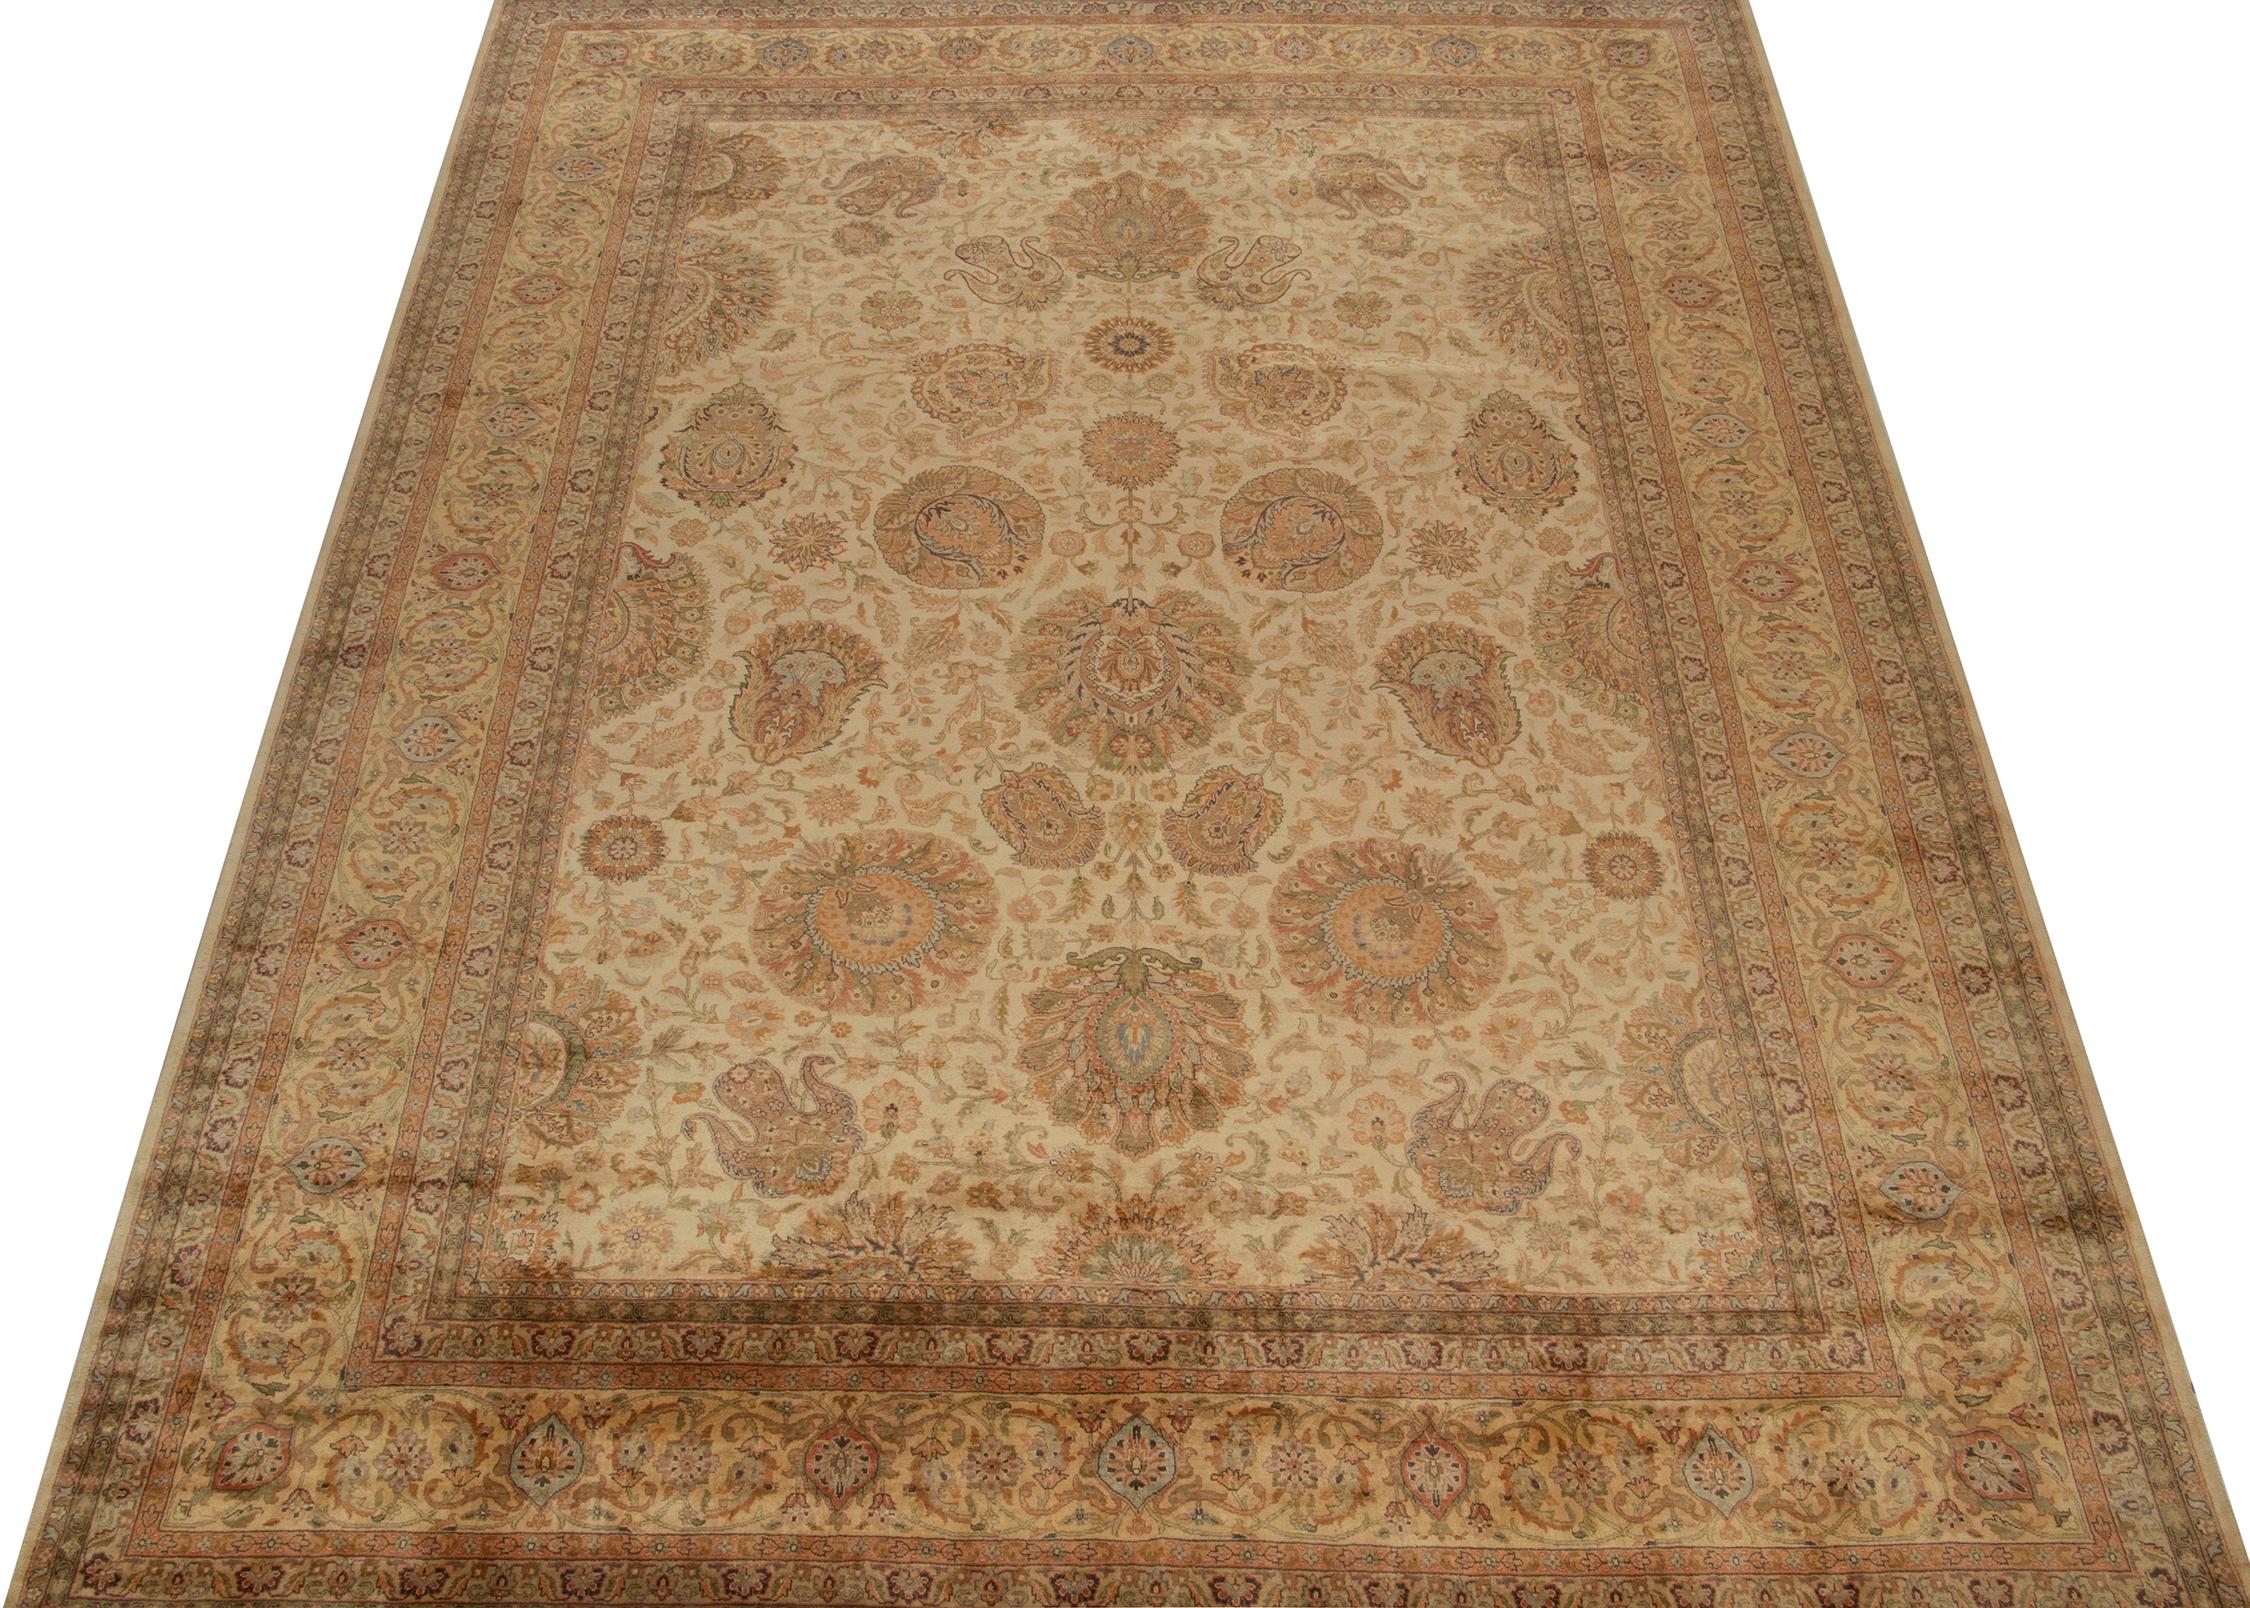 Indian Rug & Kilim’s Persian Style Rug with Gold and Beige-Brown Floral Pattern For Sale